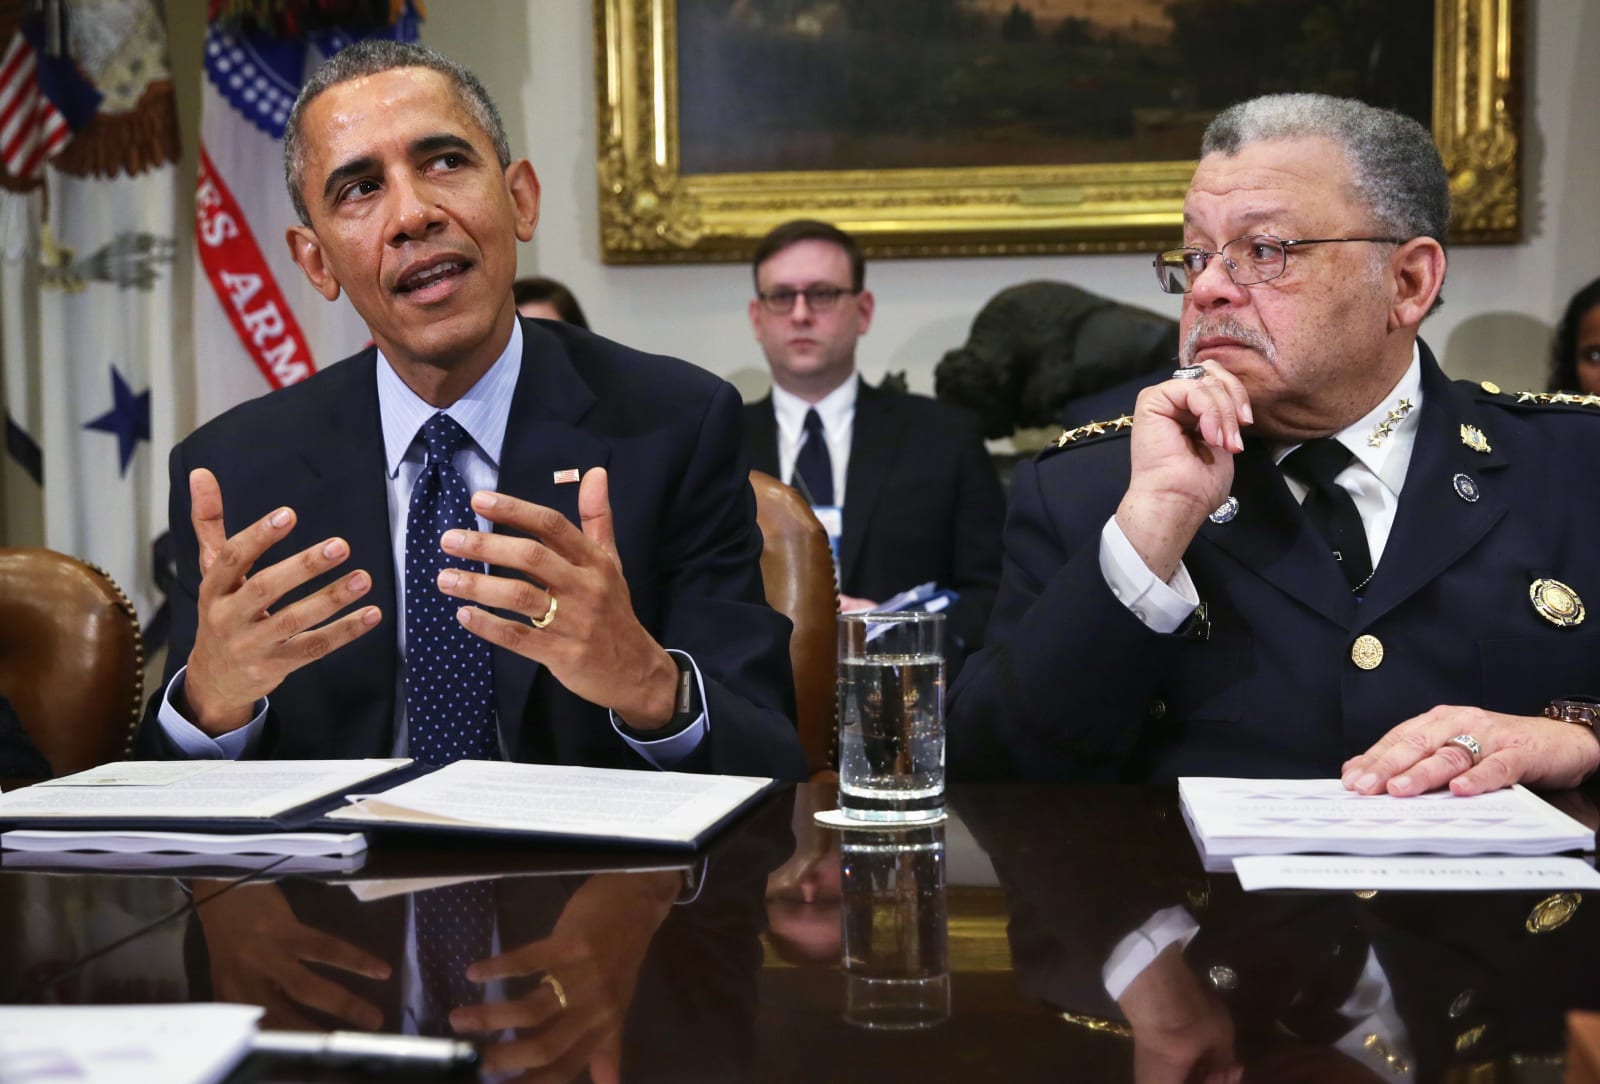 Obama Meets With Task Force On 21st Century Policing At White House